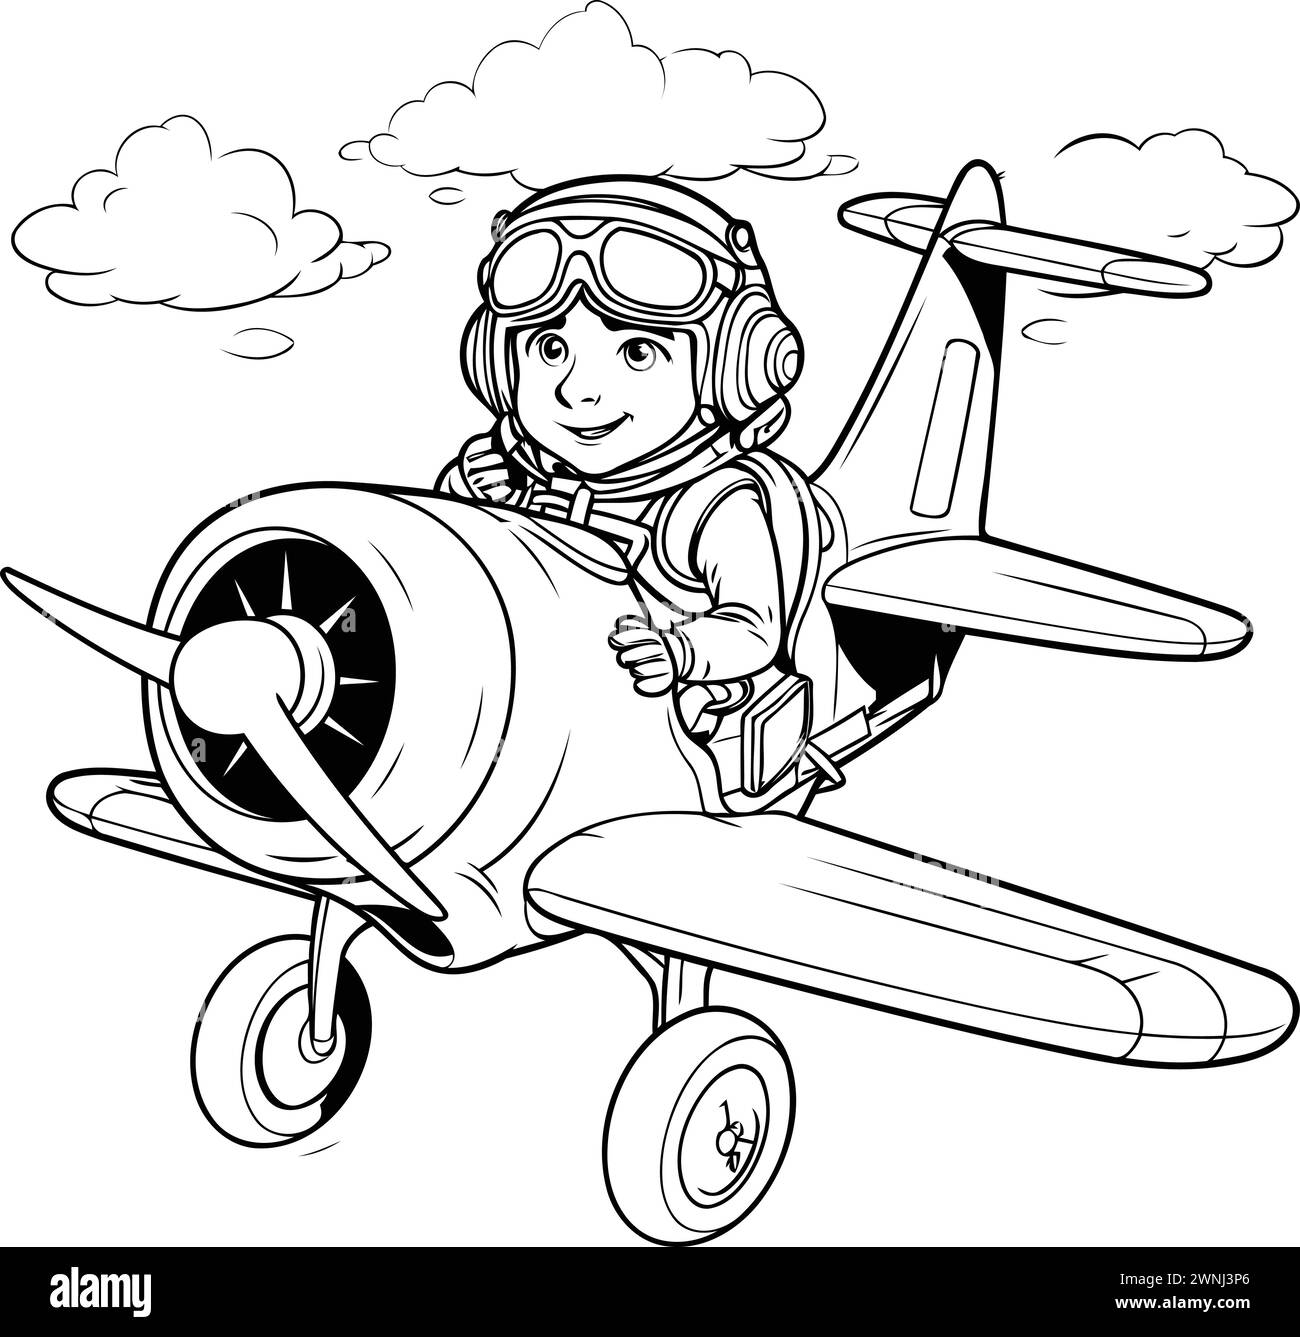 Vector illustration of Cartoon pilot with airplane. Coloring book for children. Stock Vector